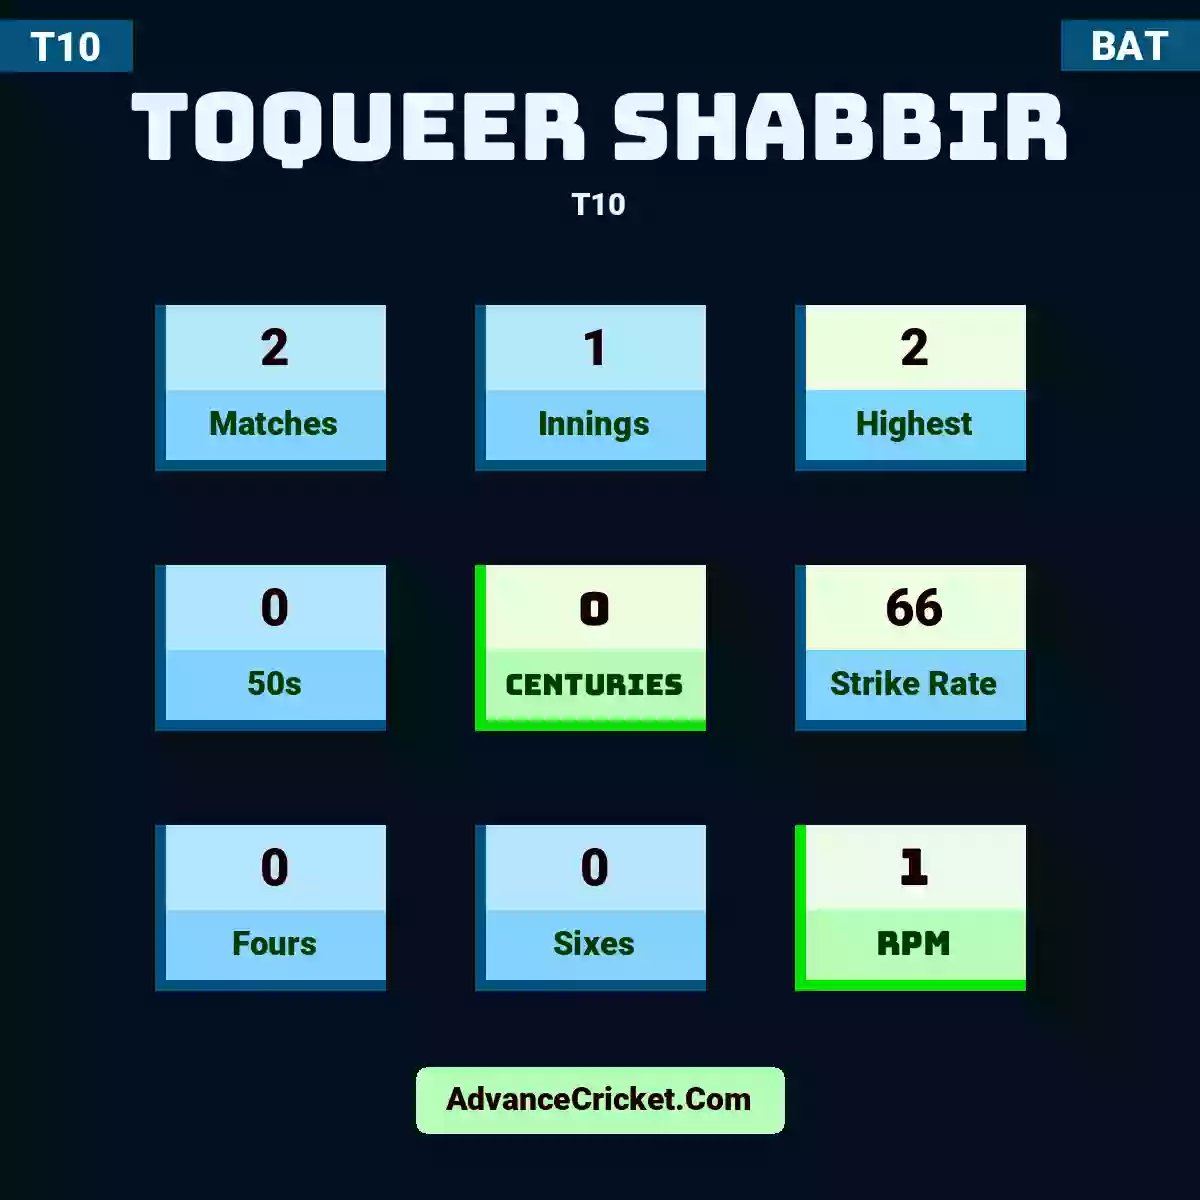 Toqueer Shabbir T10 , Toqueer Shabbir played 2 matches, scored 2 runs as highest, 0 half-centuries, and 0 centuries, with a strike rate of 66. T.Shabbir hit 0 fours and 0 sixes, with an RPM of 1.